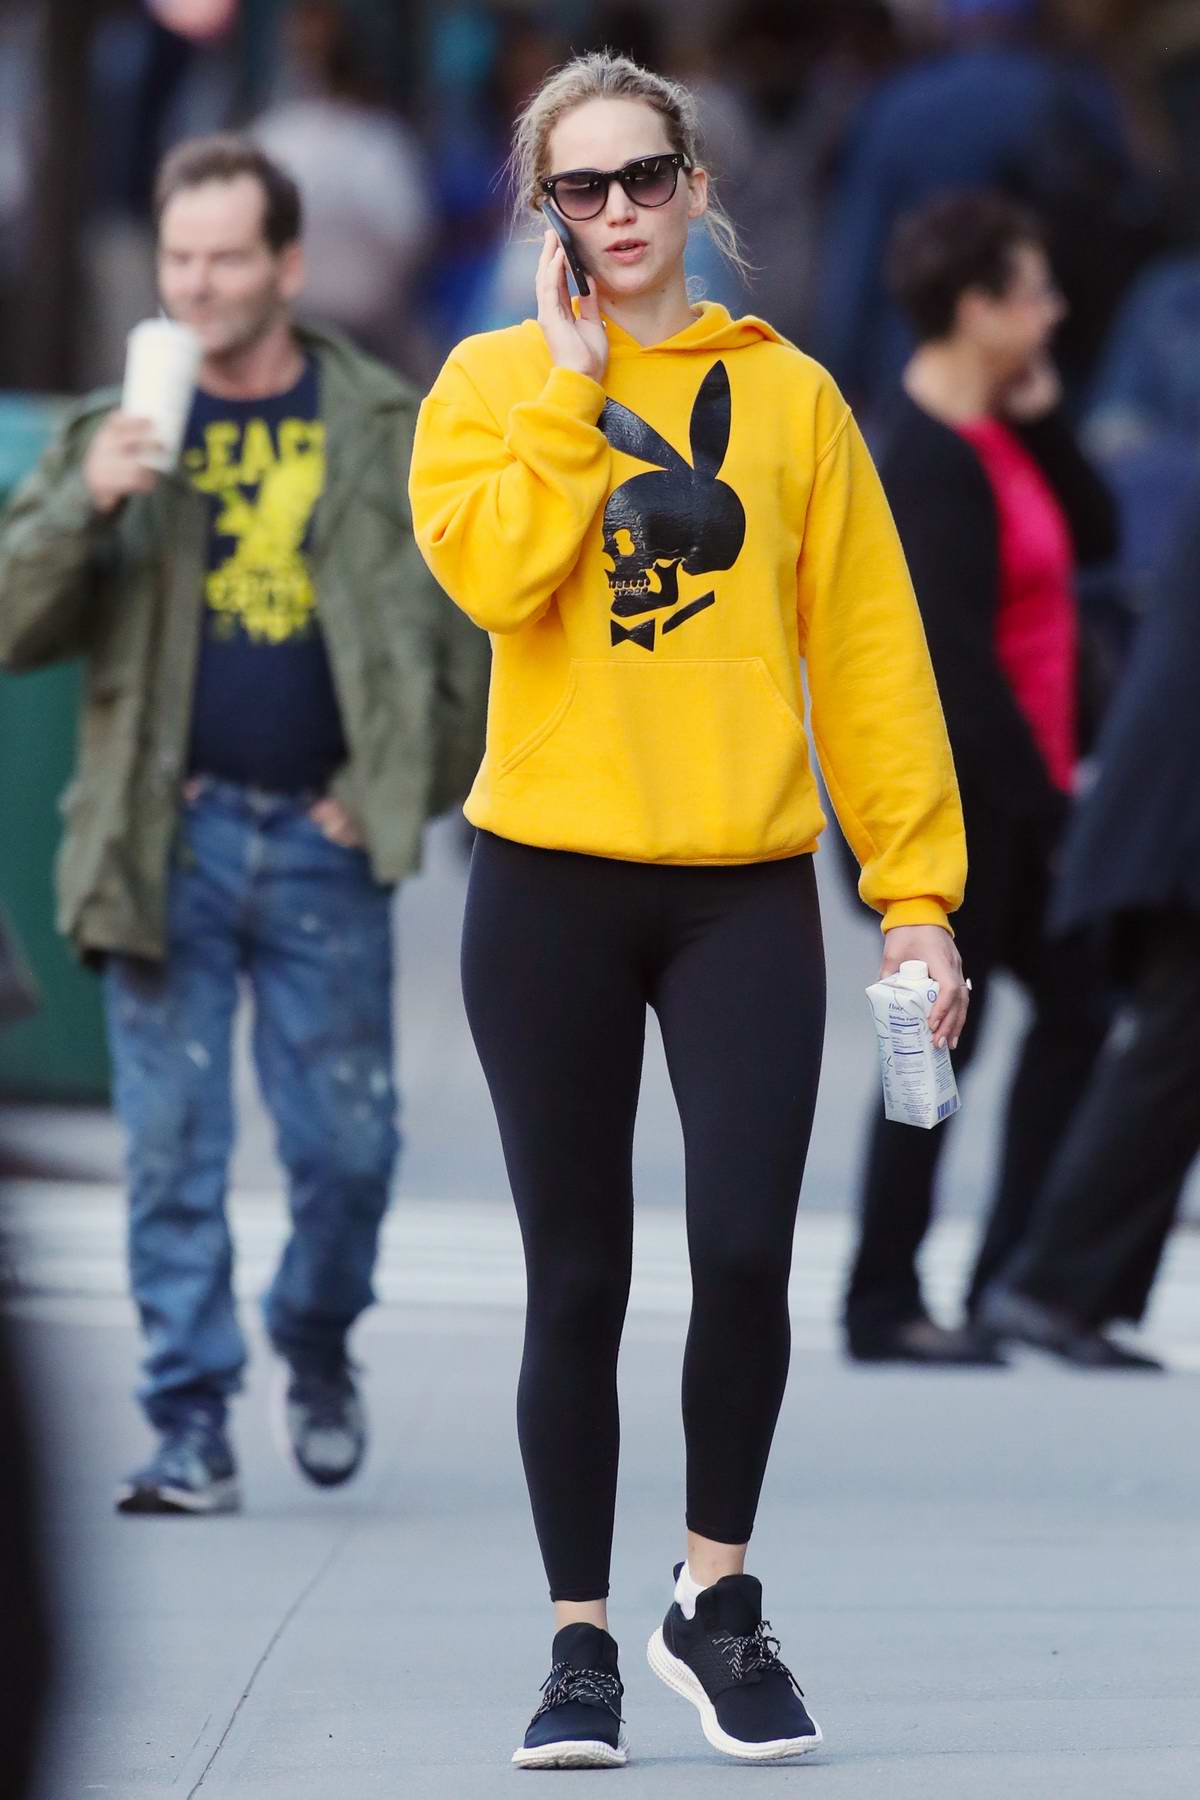 https://www.celebsfirst.com/wp-content/uploads/2019/10/jennifer-lawrence-rocks-a-bright-yellow-hoodie-and-black-leggings-while-heading-to-the-gym-in-new-york-city-071019_5.jpg